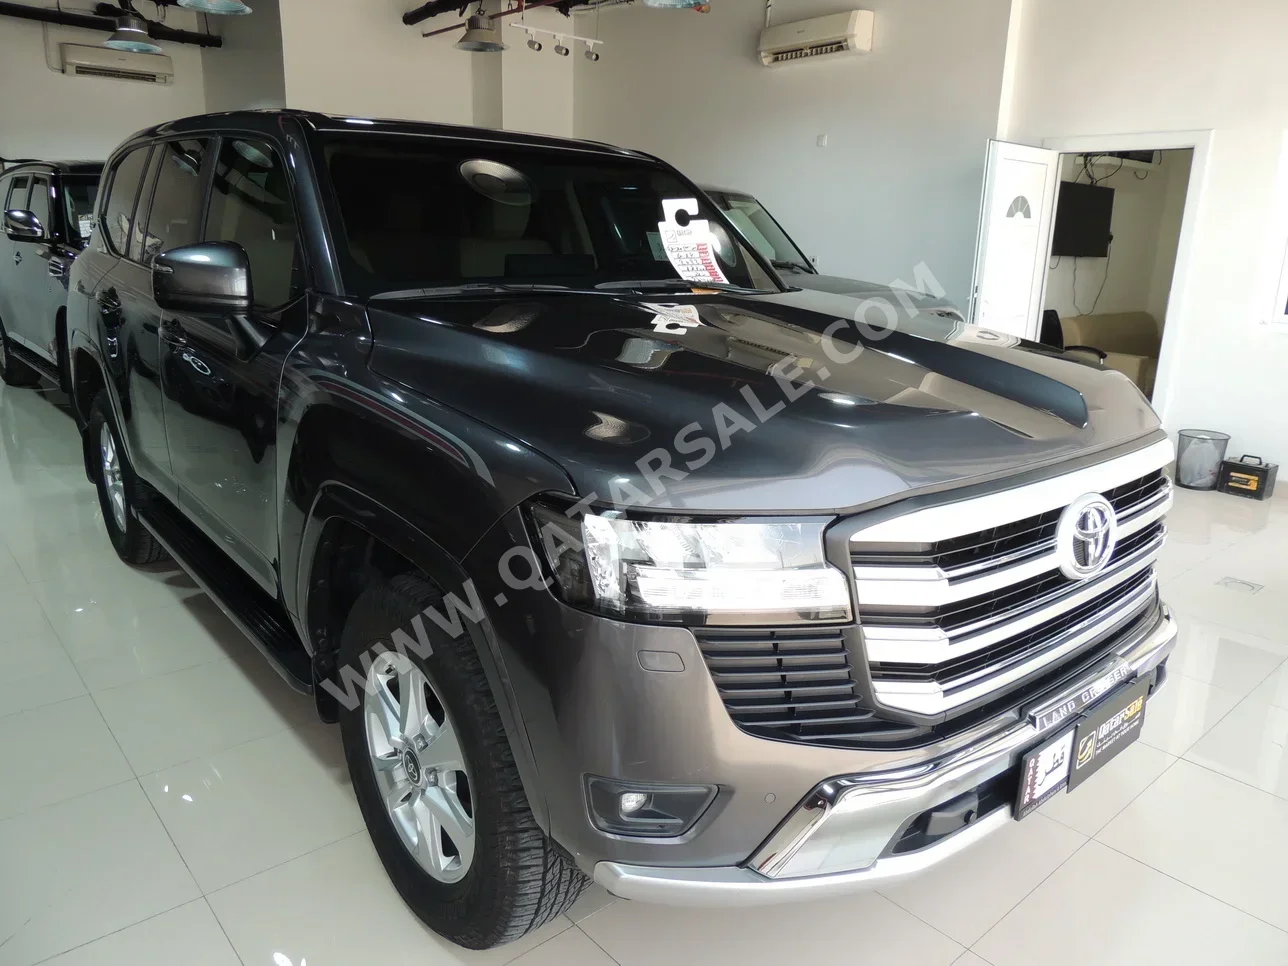 Toyota  Land Cruiser  GXR  2022  Automatic  78,700 Km  6 Cylinder  Four Wheel Drive (4WD)  SUV  Gray  With Warranty